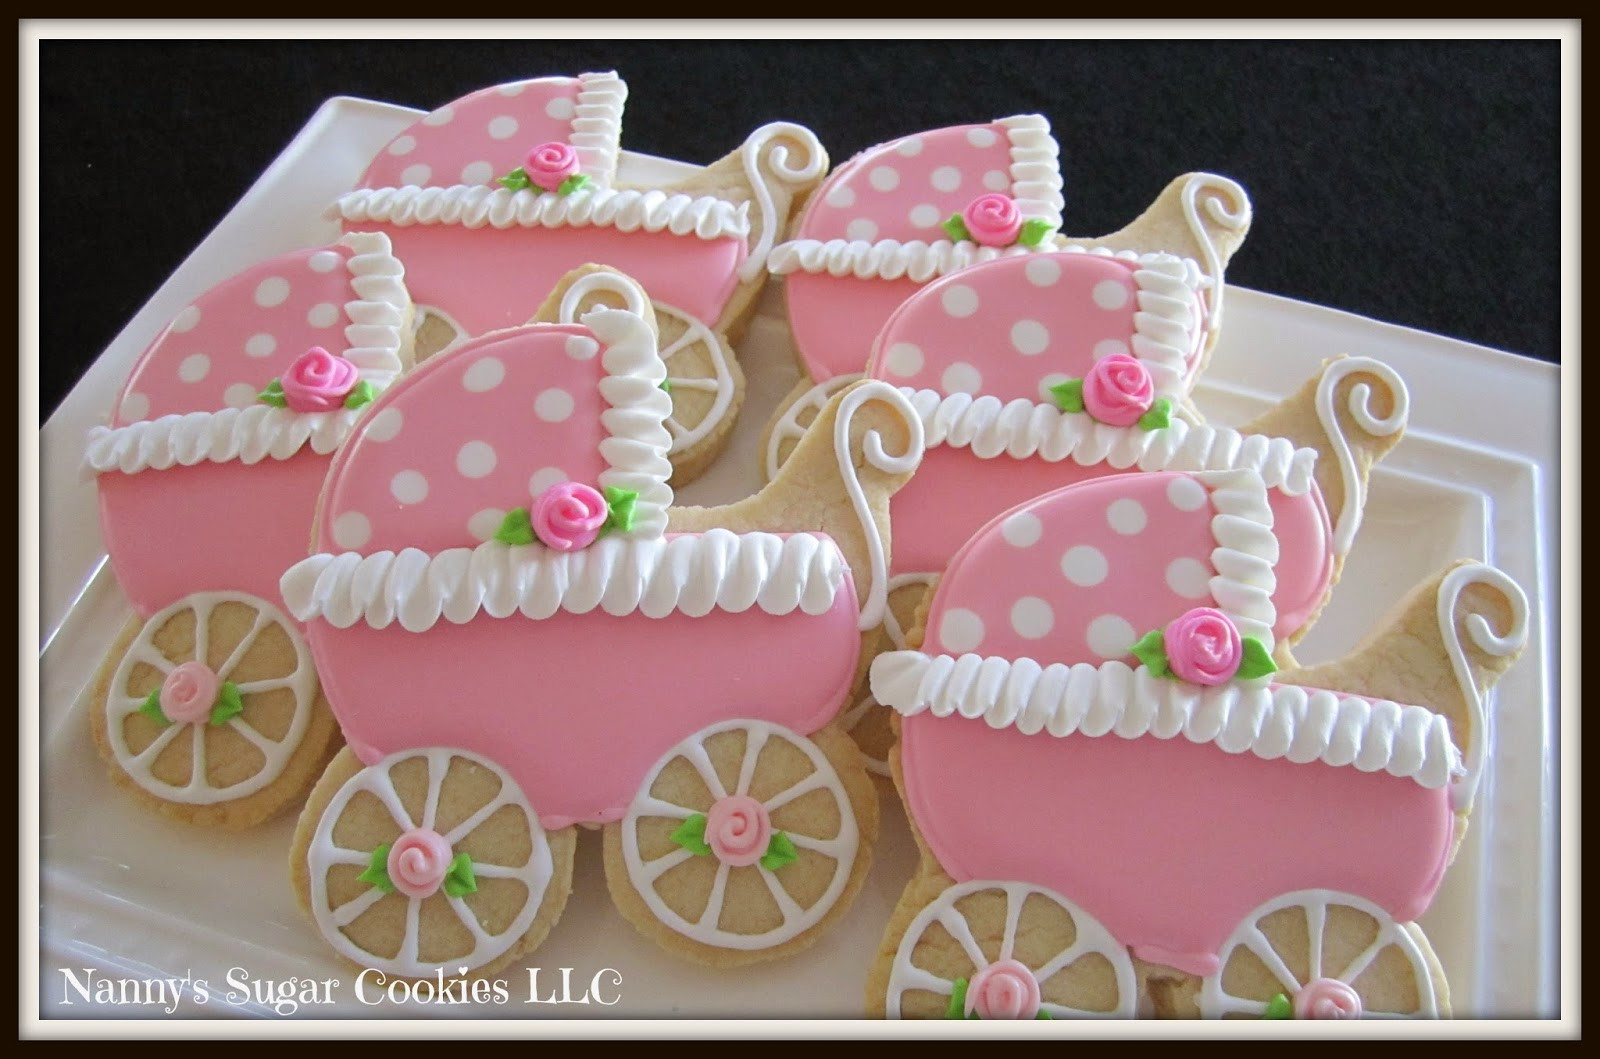 Baby Shower Cookie Recipes
 Nanny s Sugar Cookies LLC Cookies for a Baby Girl Shower